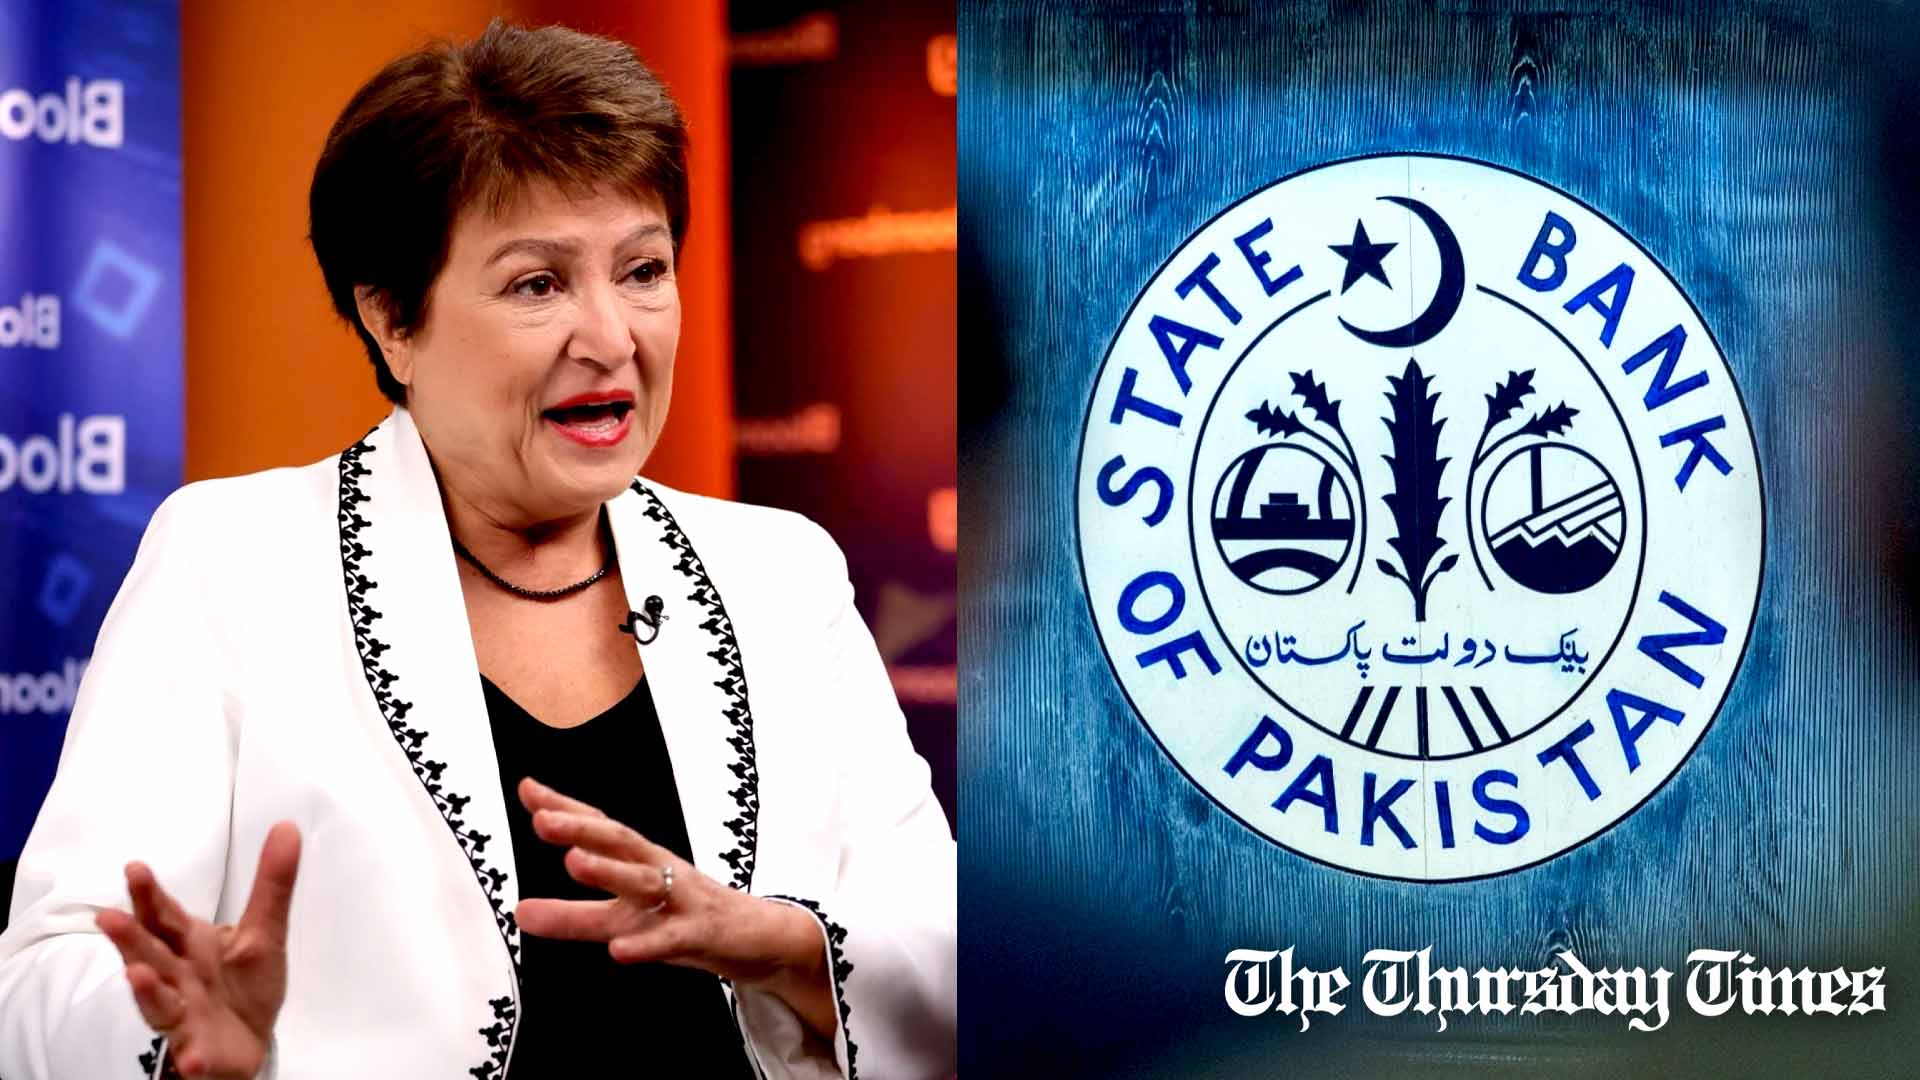 A file photo is shown of IMF MD Kristalina Georgieva (L) at Marrakesh on October 13, 2023 and the State Bank of Pakistan emblem at Karachi (R). — FILE/BLOOMBERG/THE THURSDAY TIMES